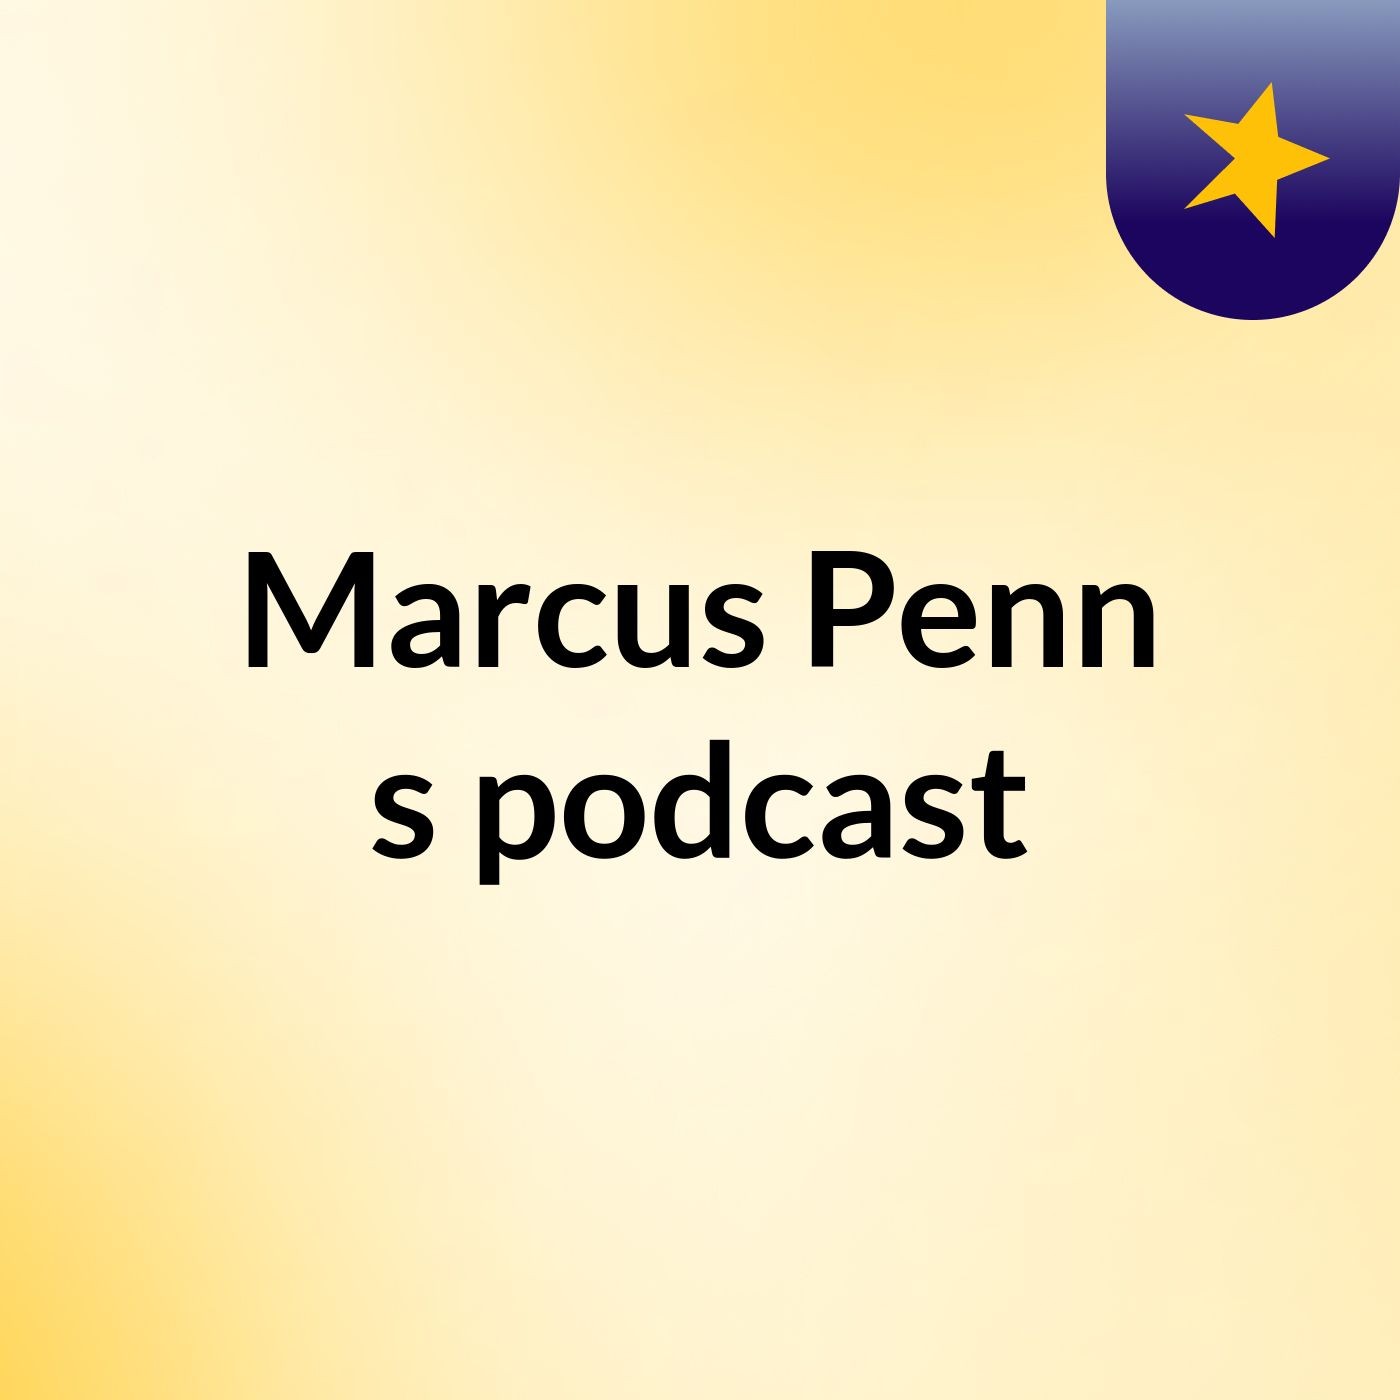 Episode 3 - Marcus Penn's podcast